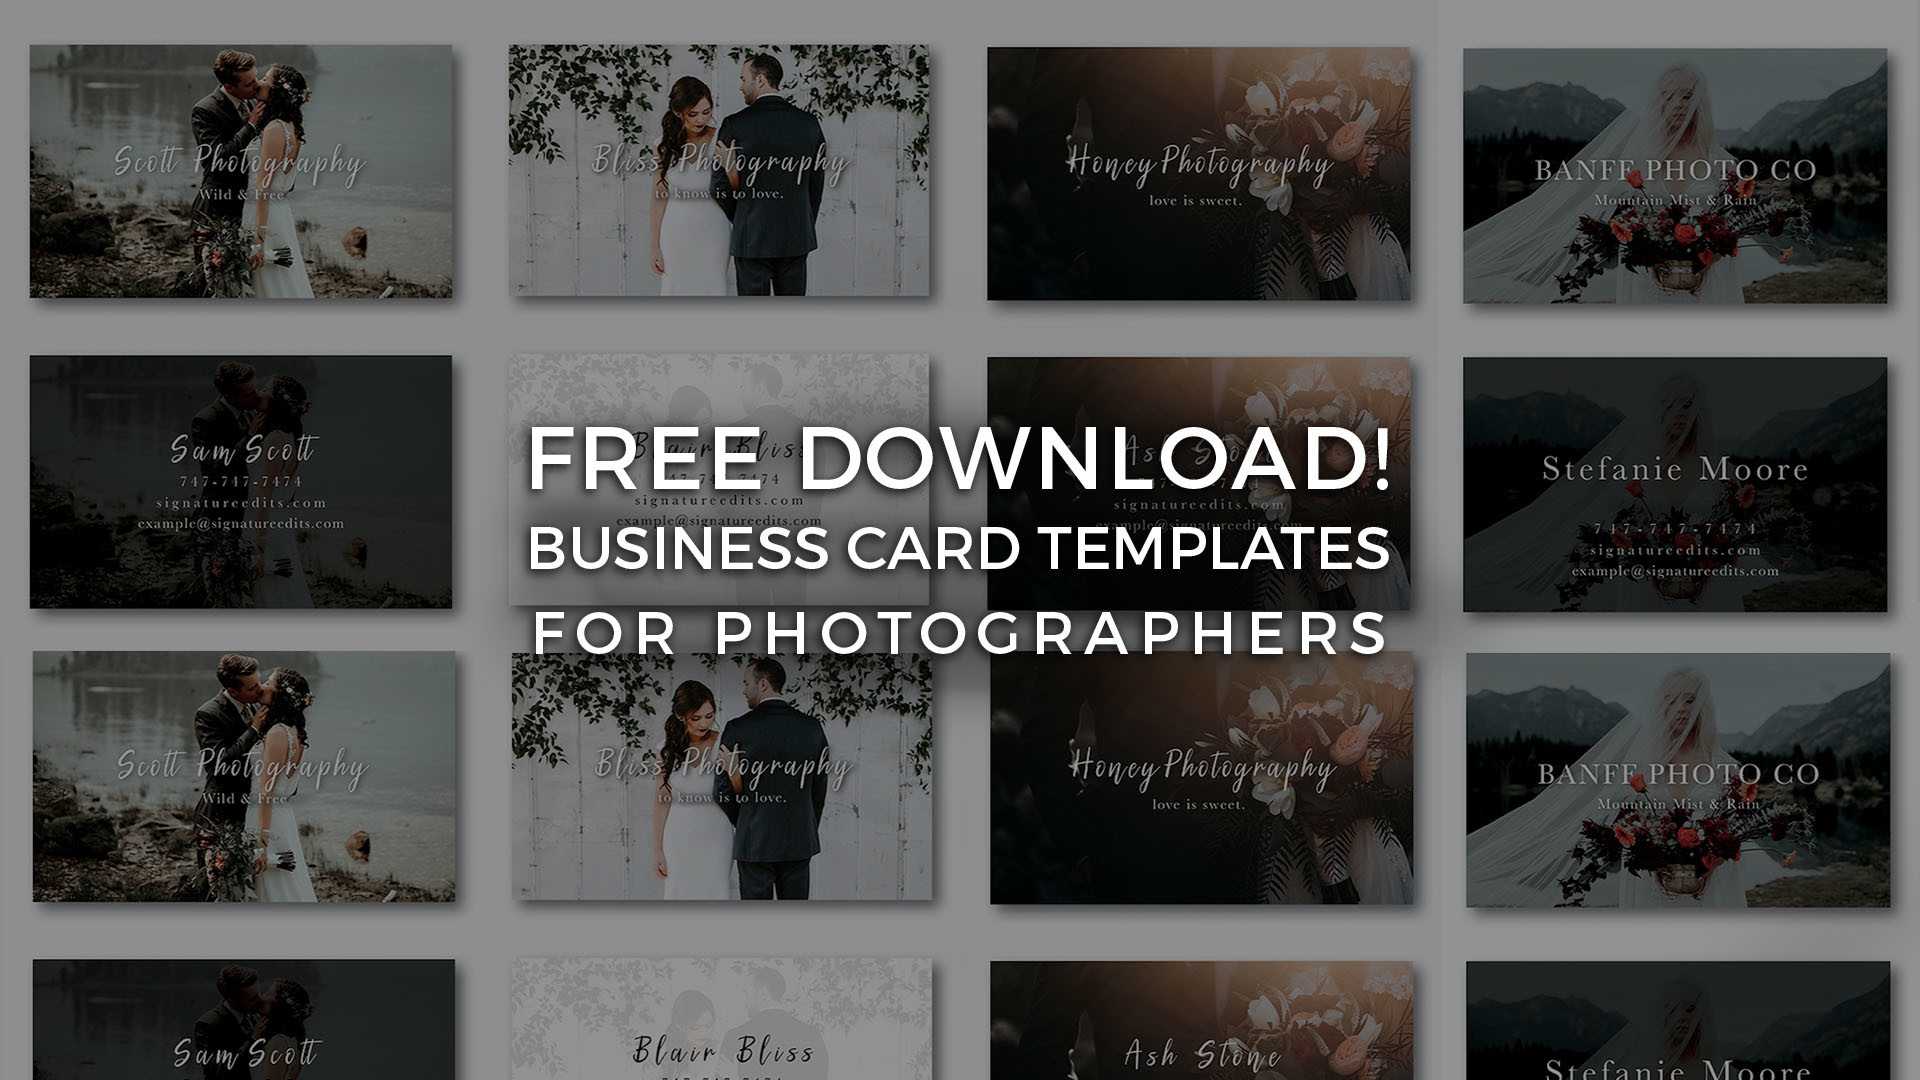 Free Photographer Business Card Templates! – Signature Edits Throughout Free Business Card Templates For Photographers